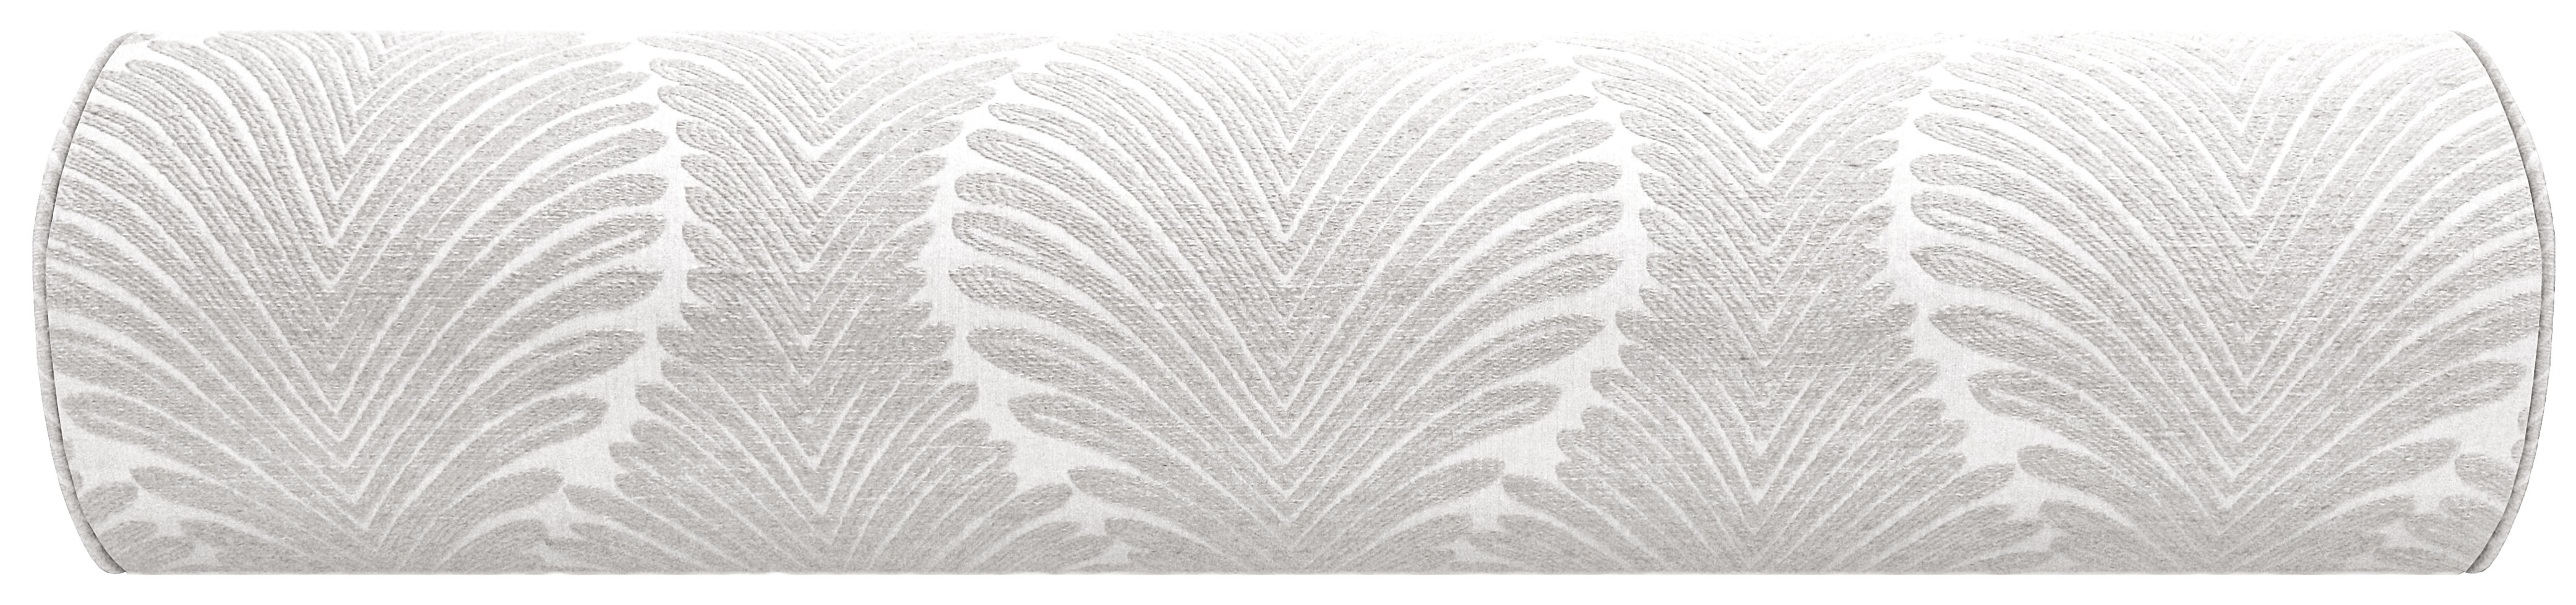 The Bolster :: Musgrove Chenille // Dove Grey - KING // 9" X 48" - Image 1